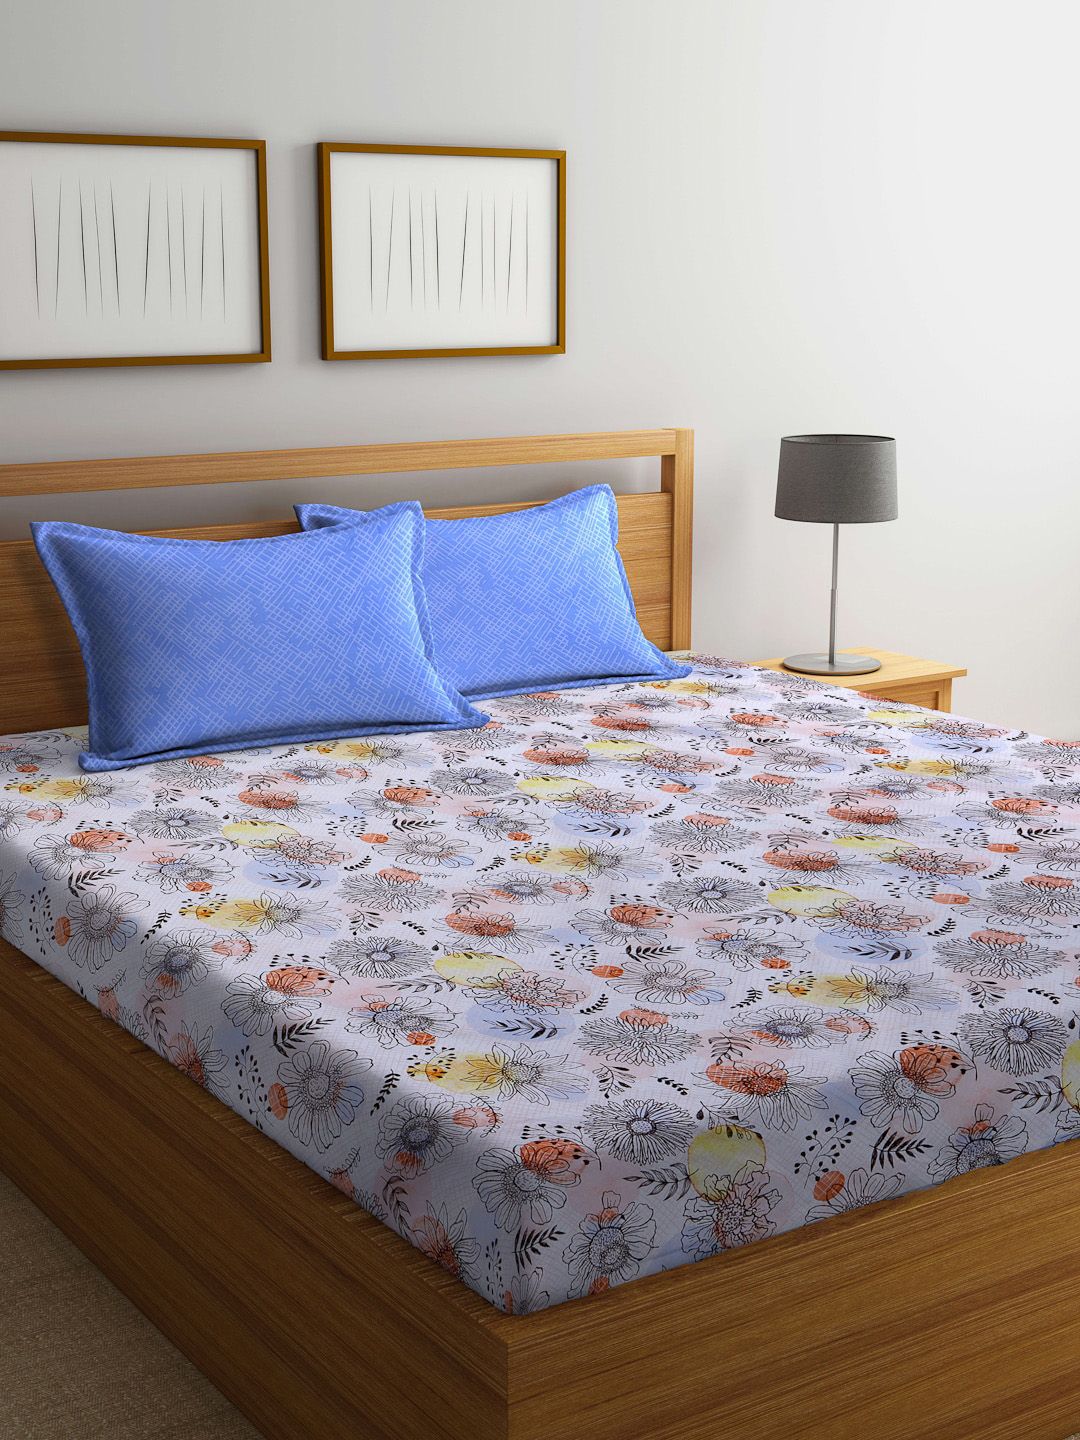 BOMBAY DYEING Unisex Blue Bedsheets Price in India